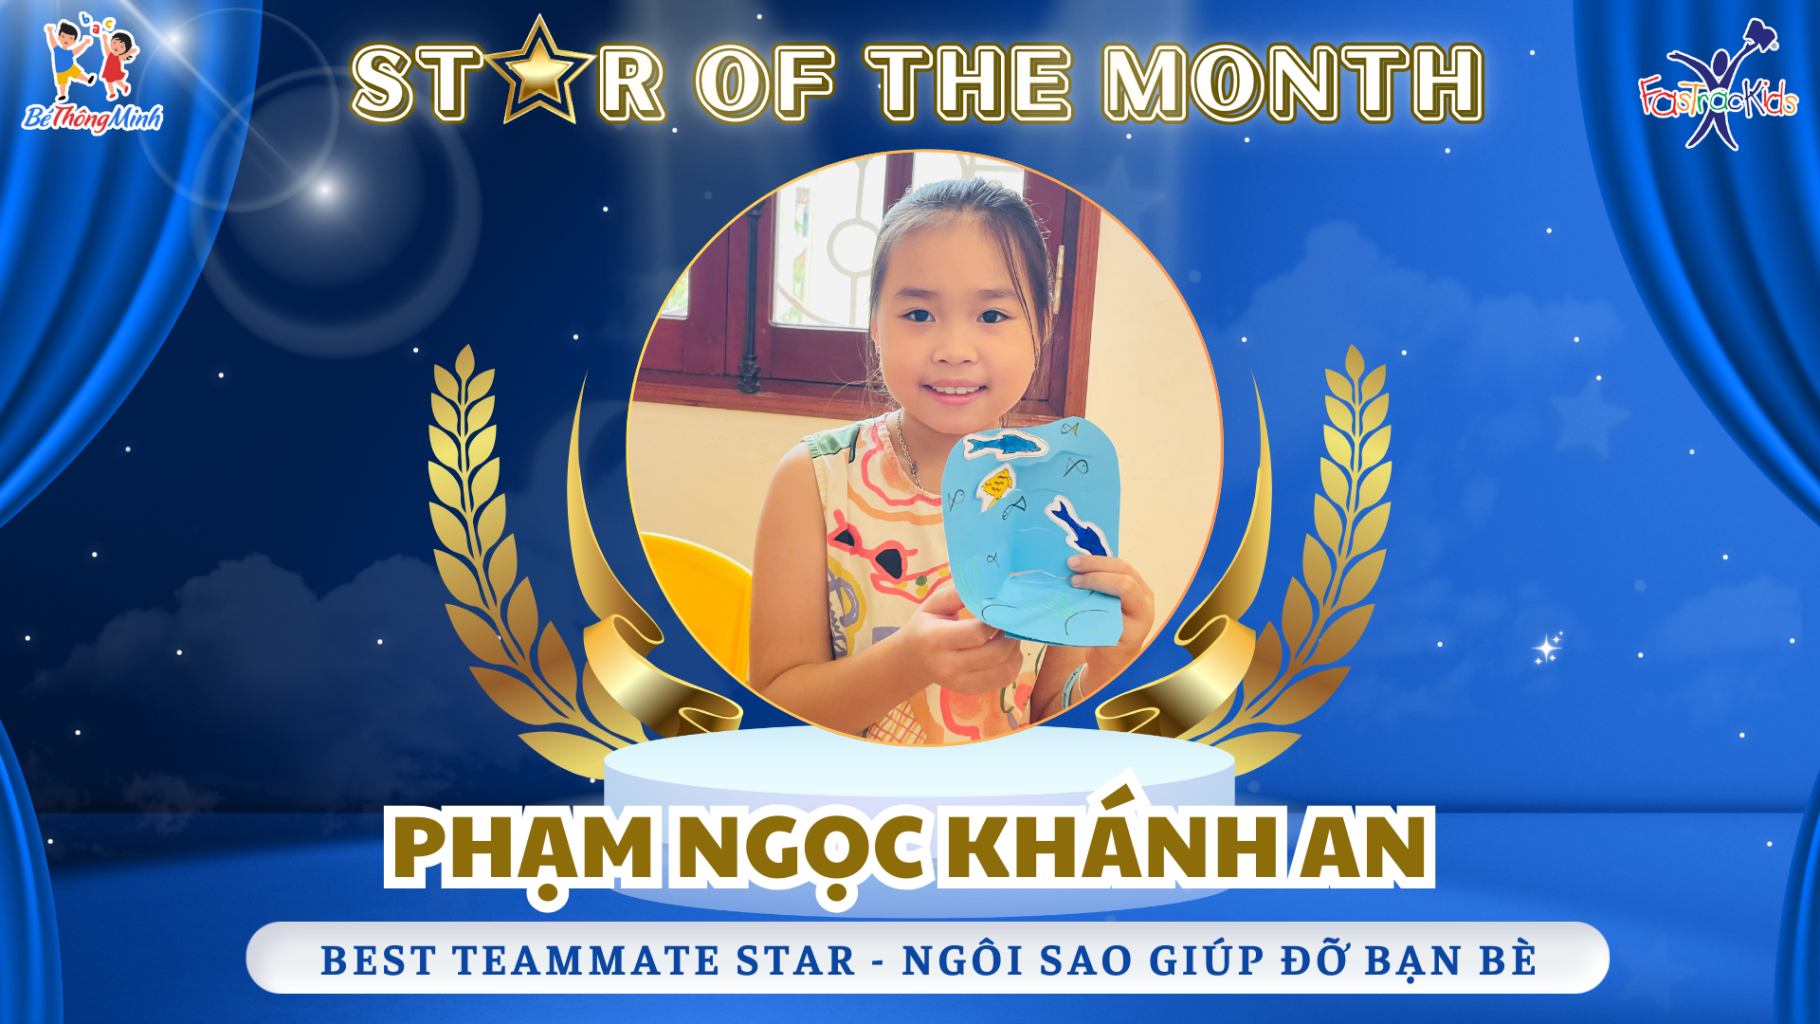 Best Teammate Star of the Month May